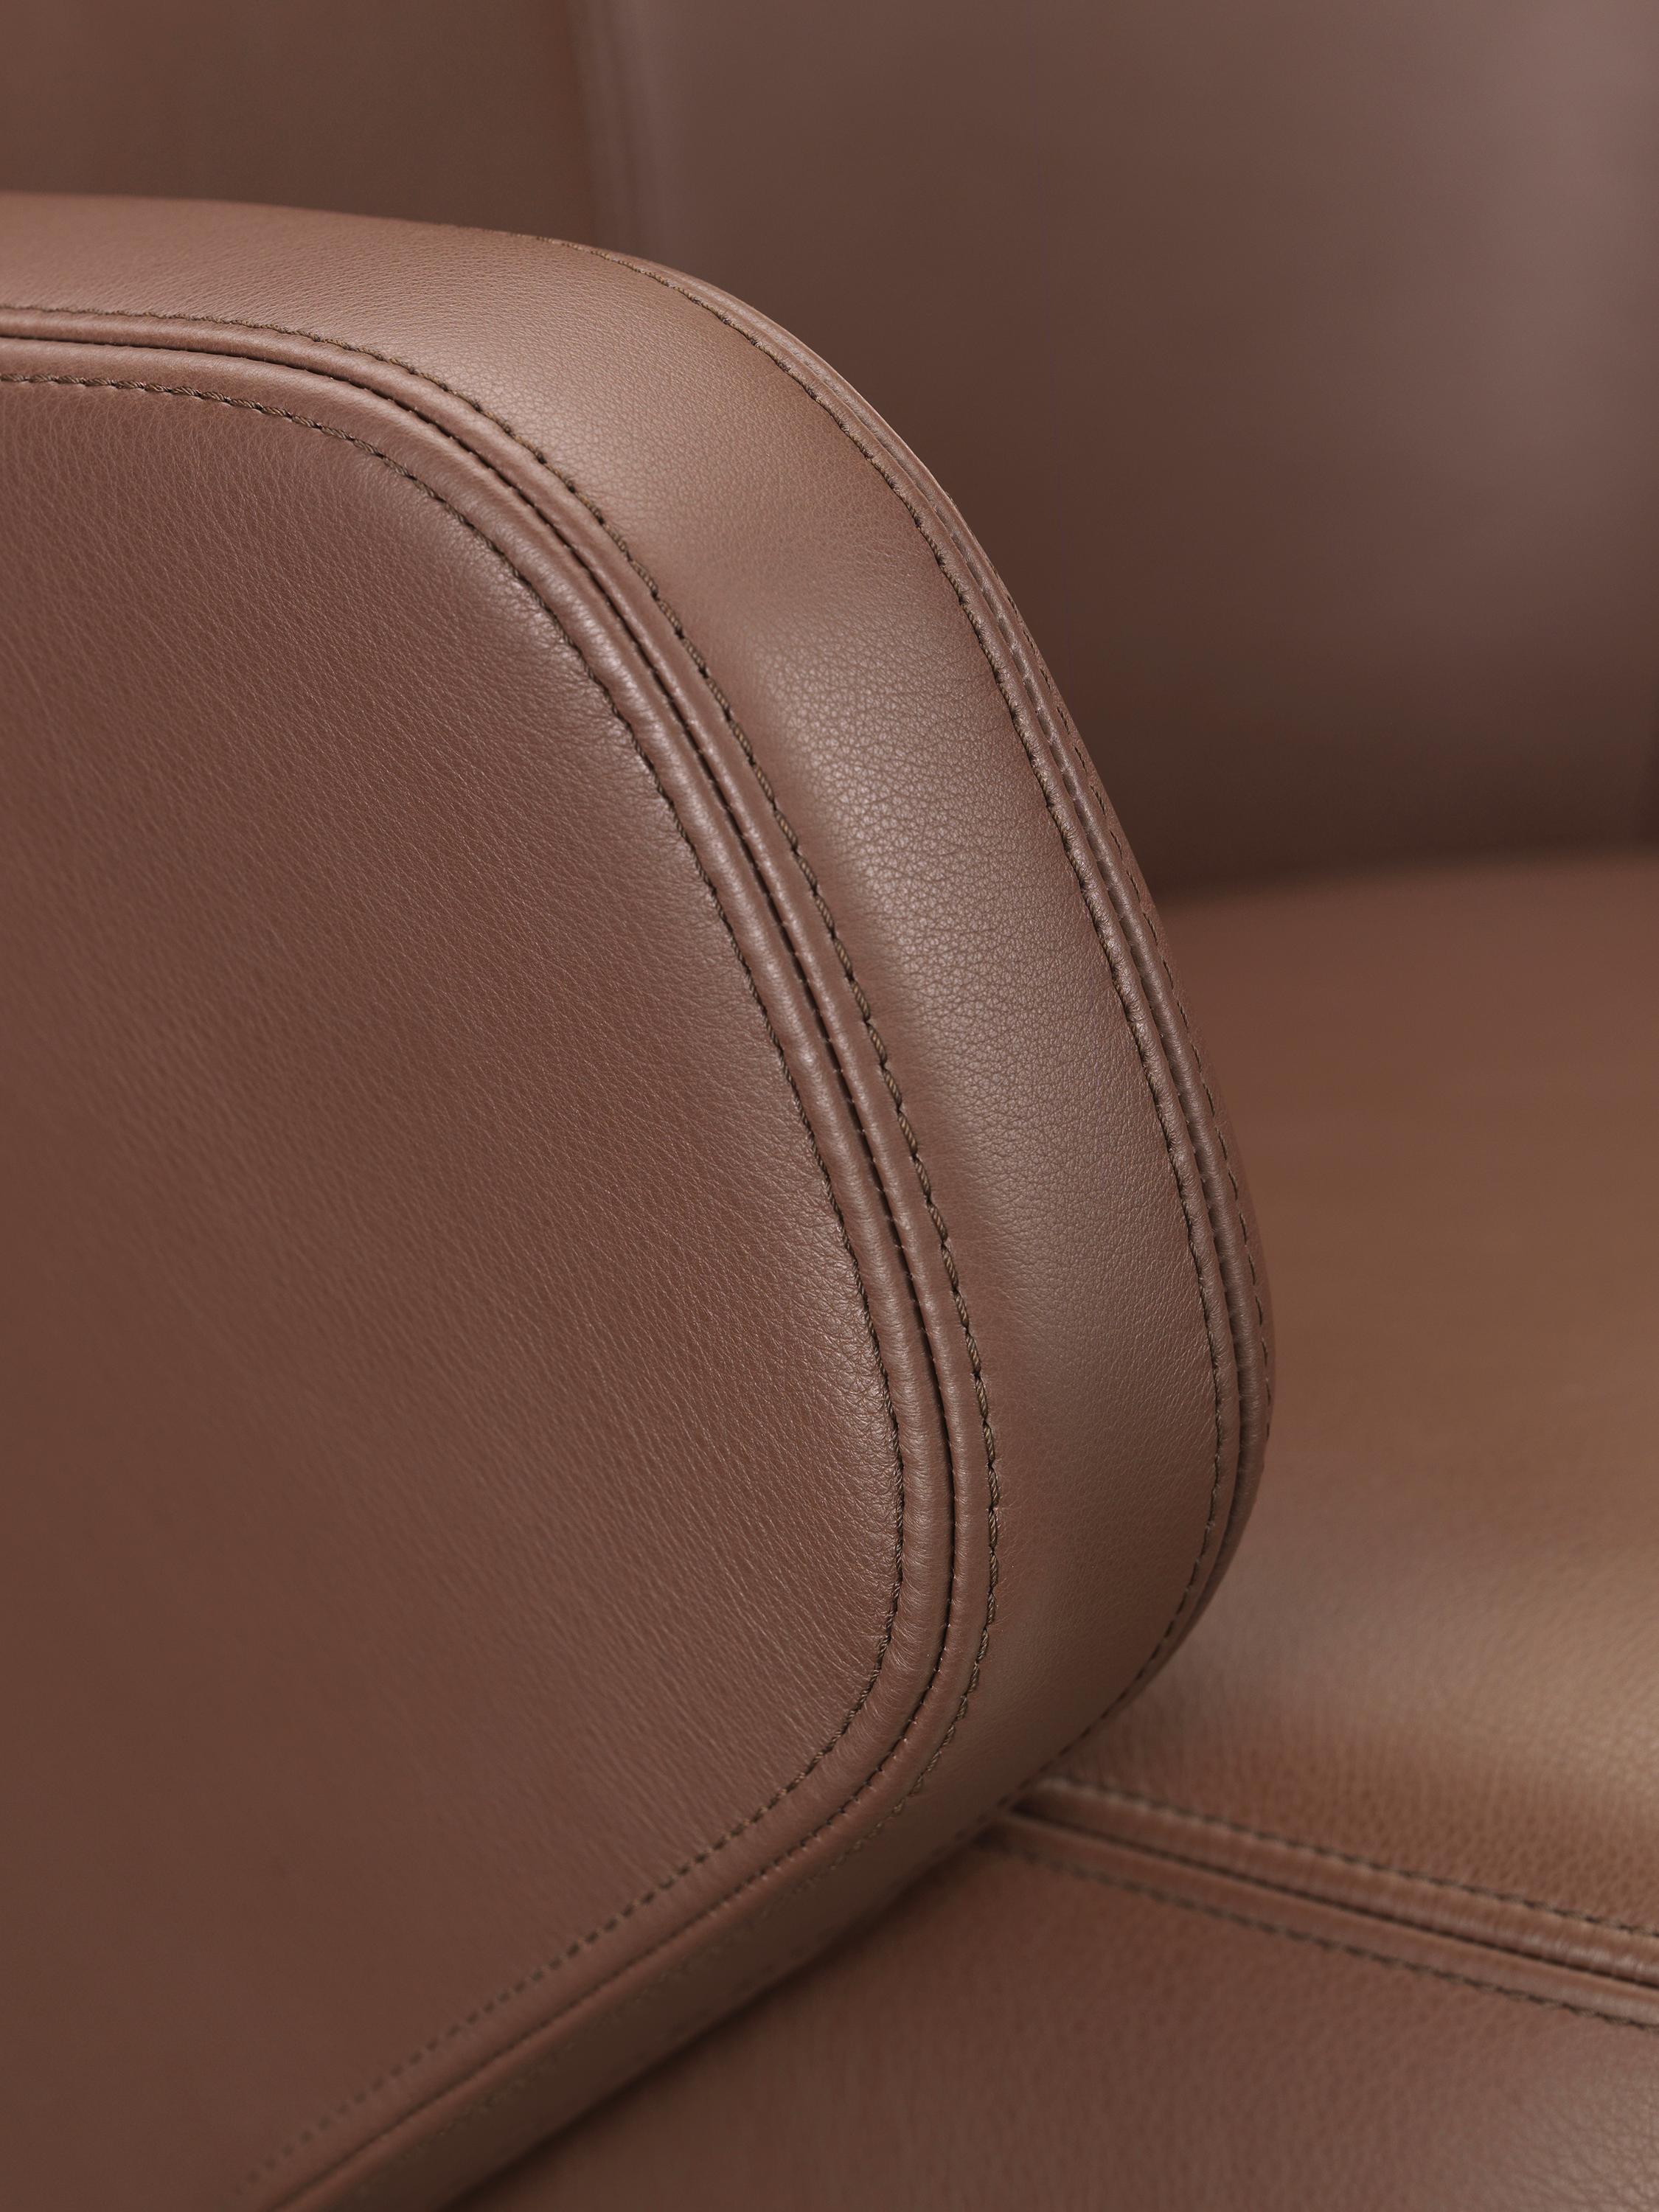 These items are currently only available in the United States.

The prestigious Grand Executive armchair combines soft, high-quality leather upholstery with the individually adaptable Flow Motion mechanism for exceptional comfort. Mechanism: Flow